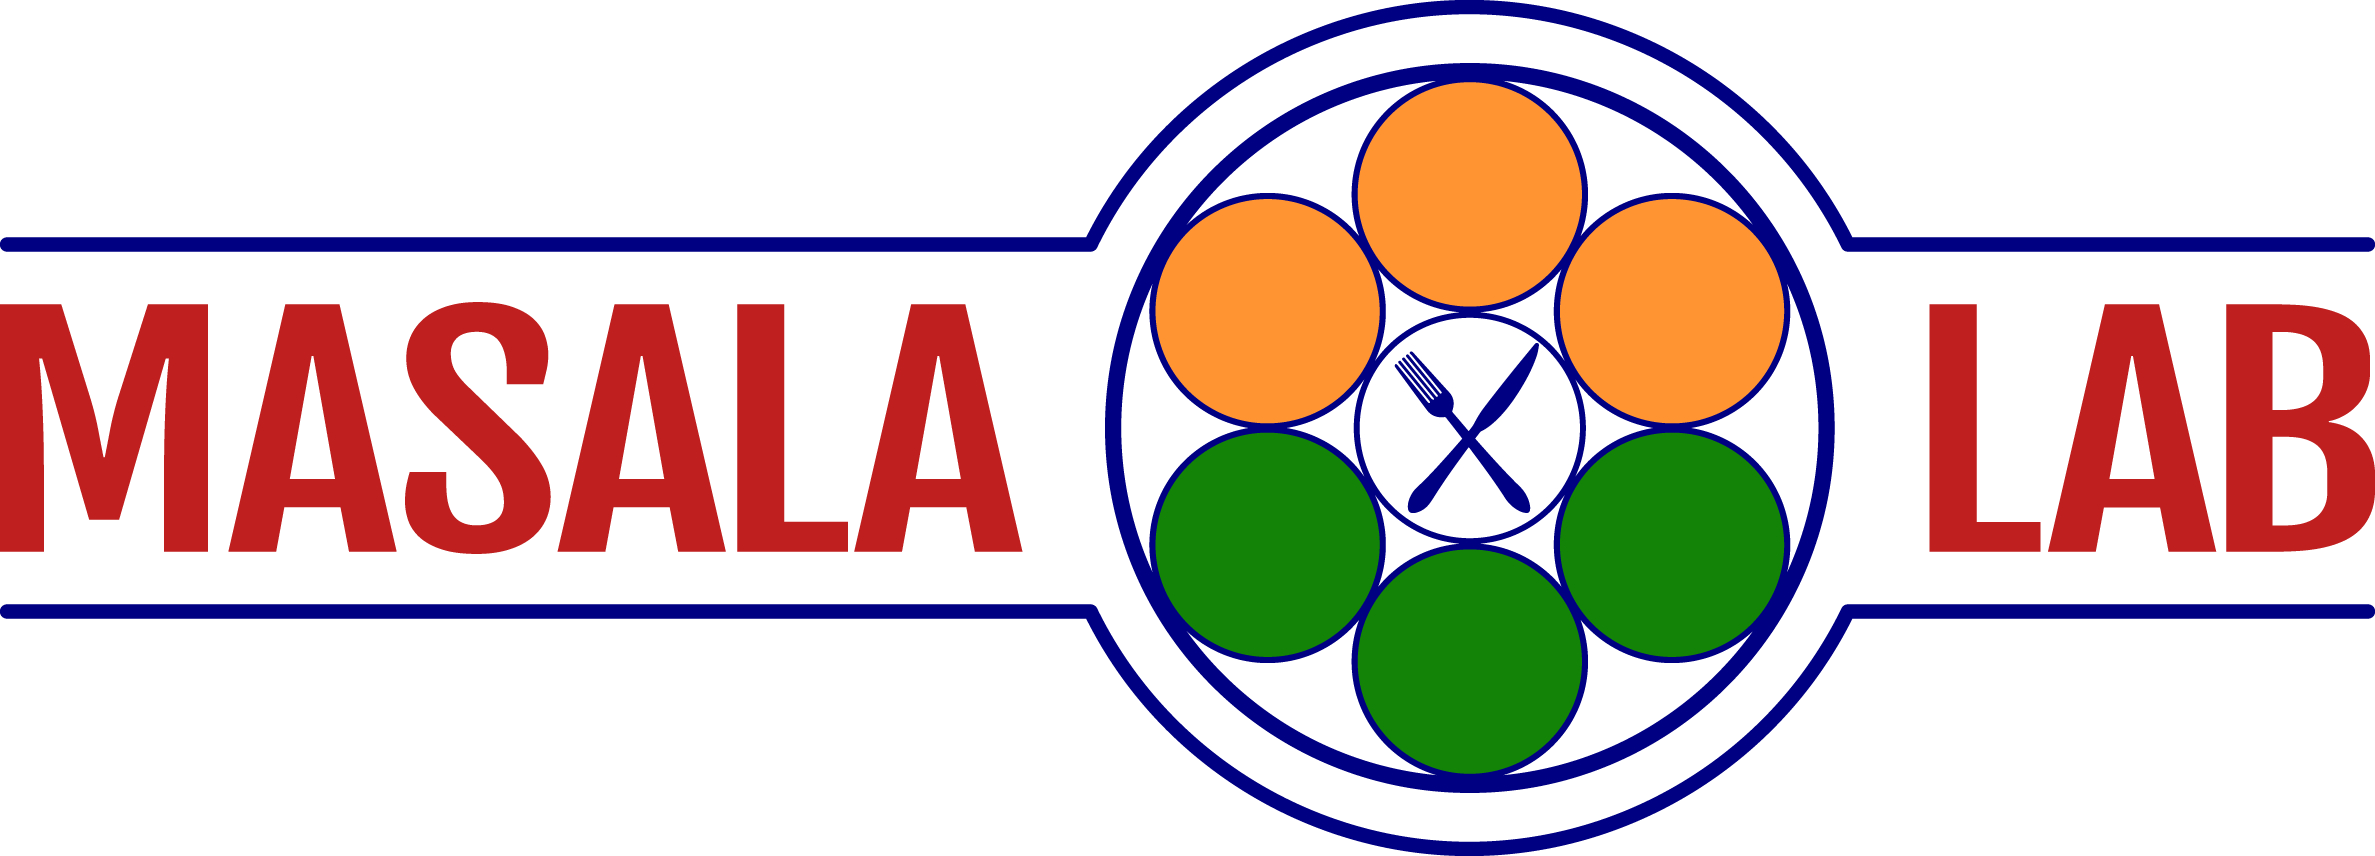 Our colorful logo in orange and green -- "Masala Lab"